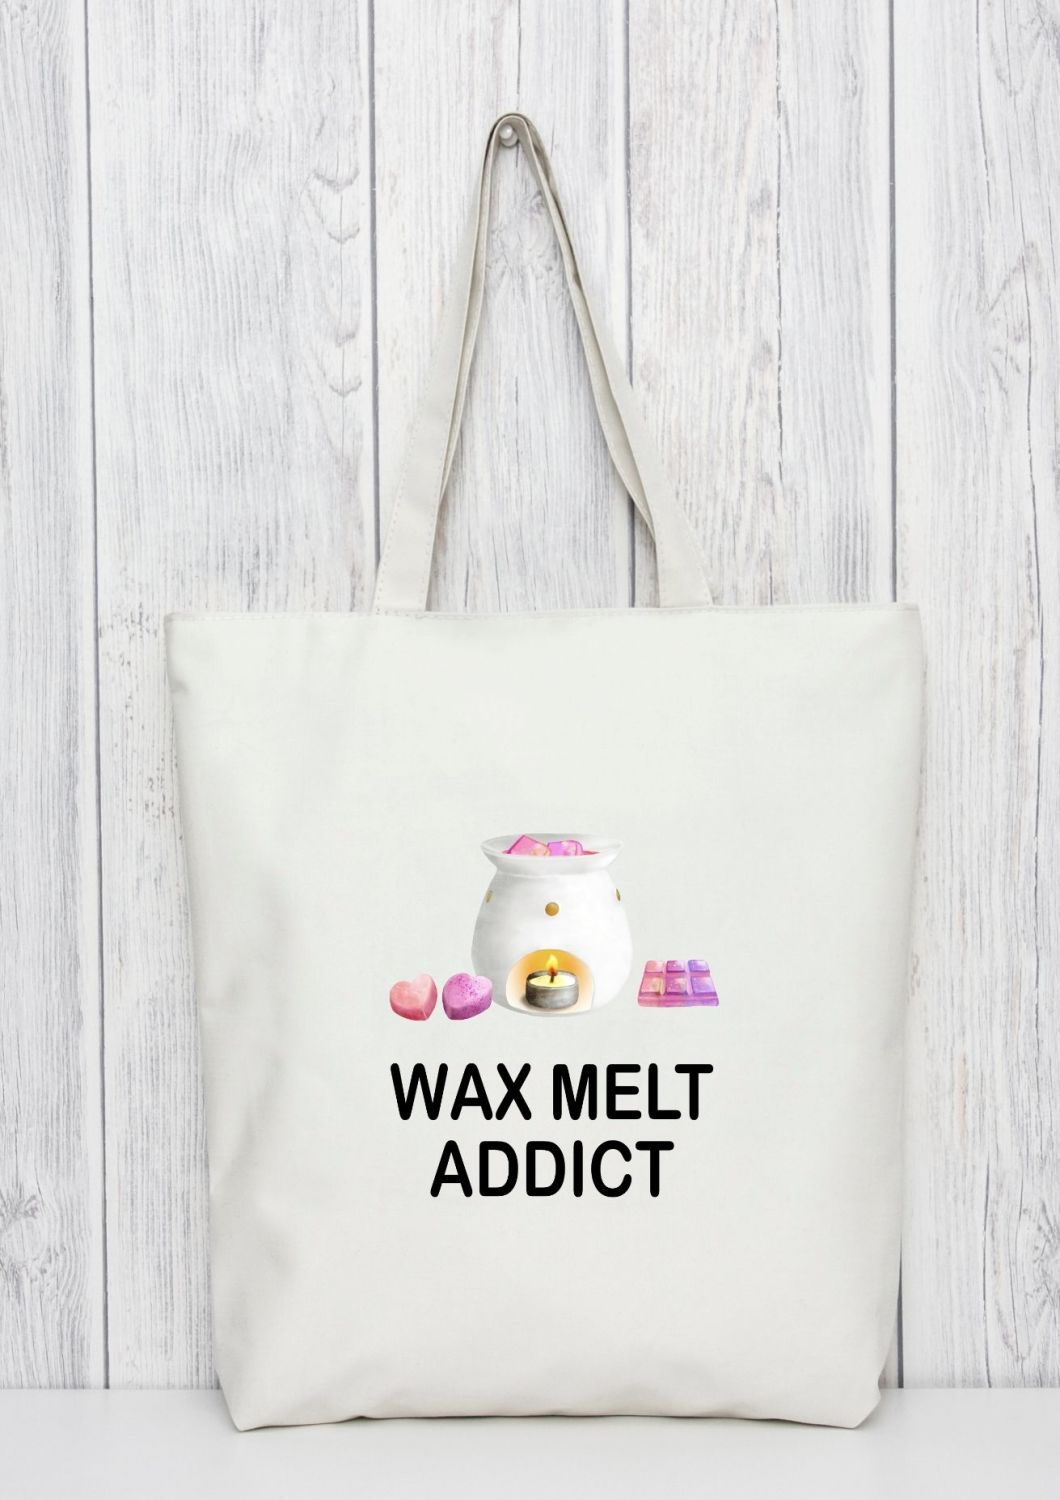 Wax melts addicts tote bag gift. Available in blue or pink tote bag. Bag fo